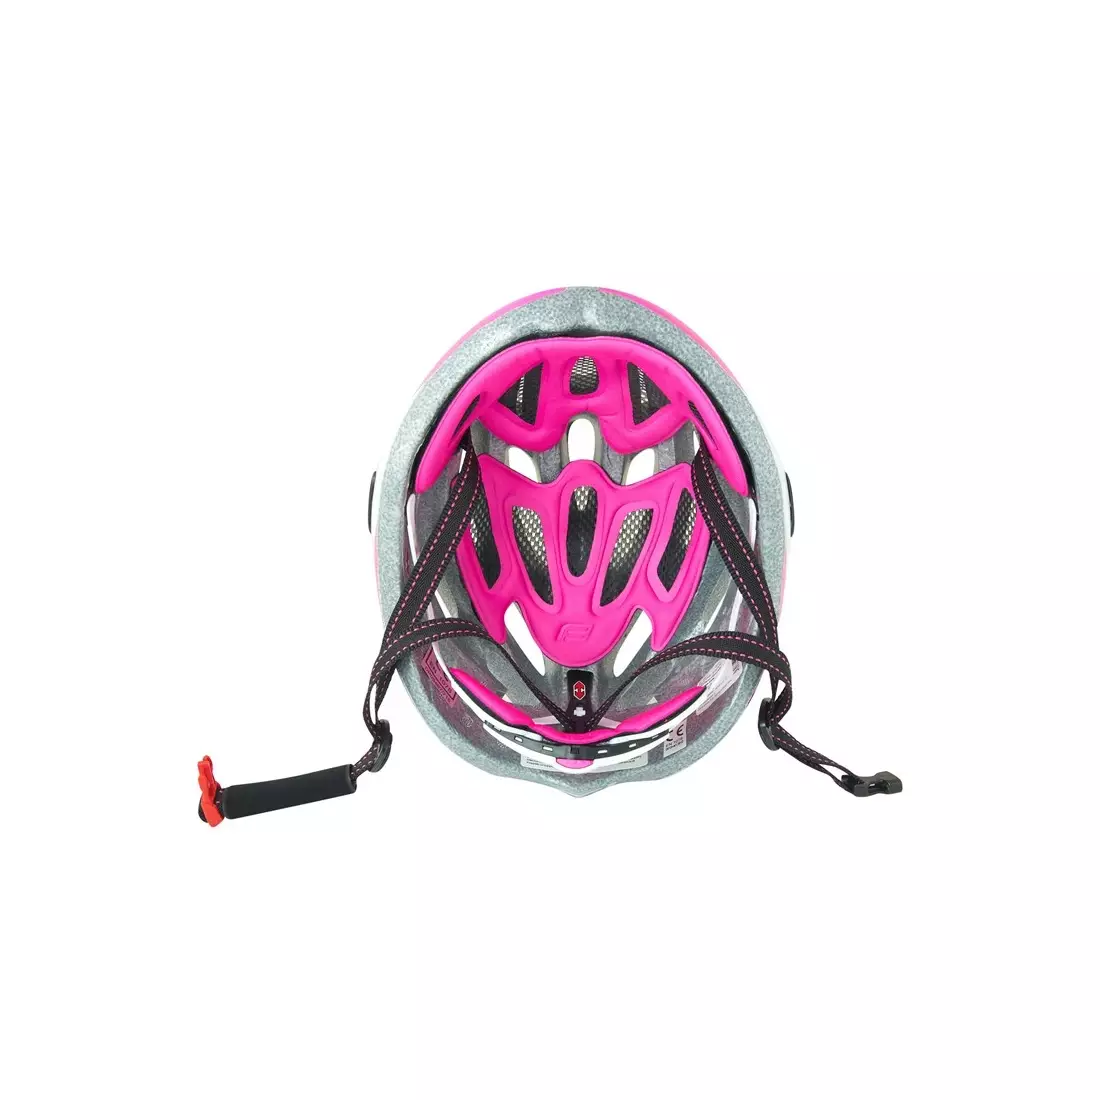 FORCE women's bicycle helmet, black and pink 902616